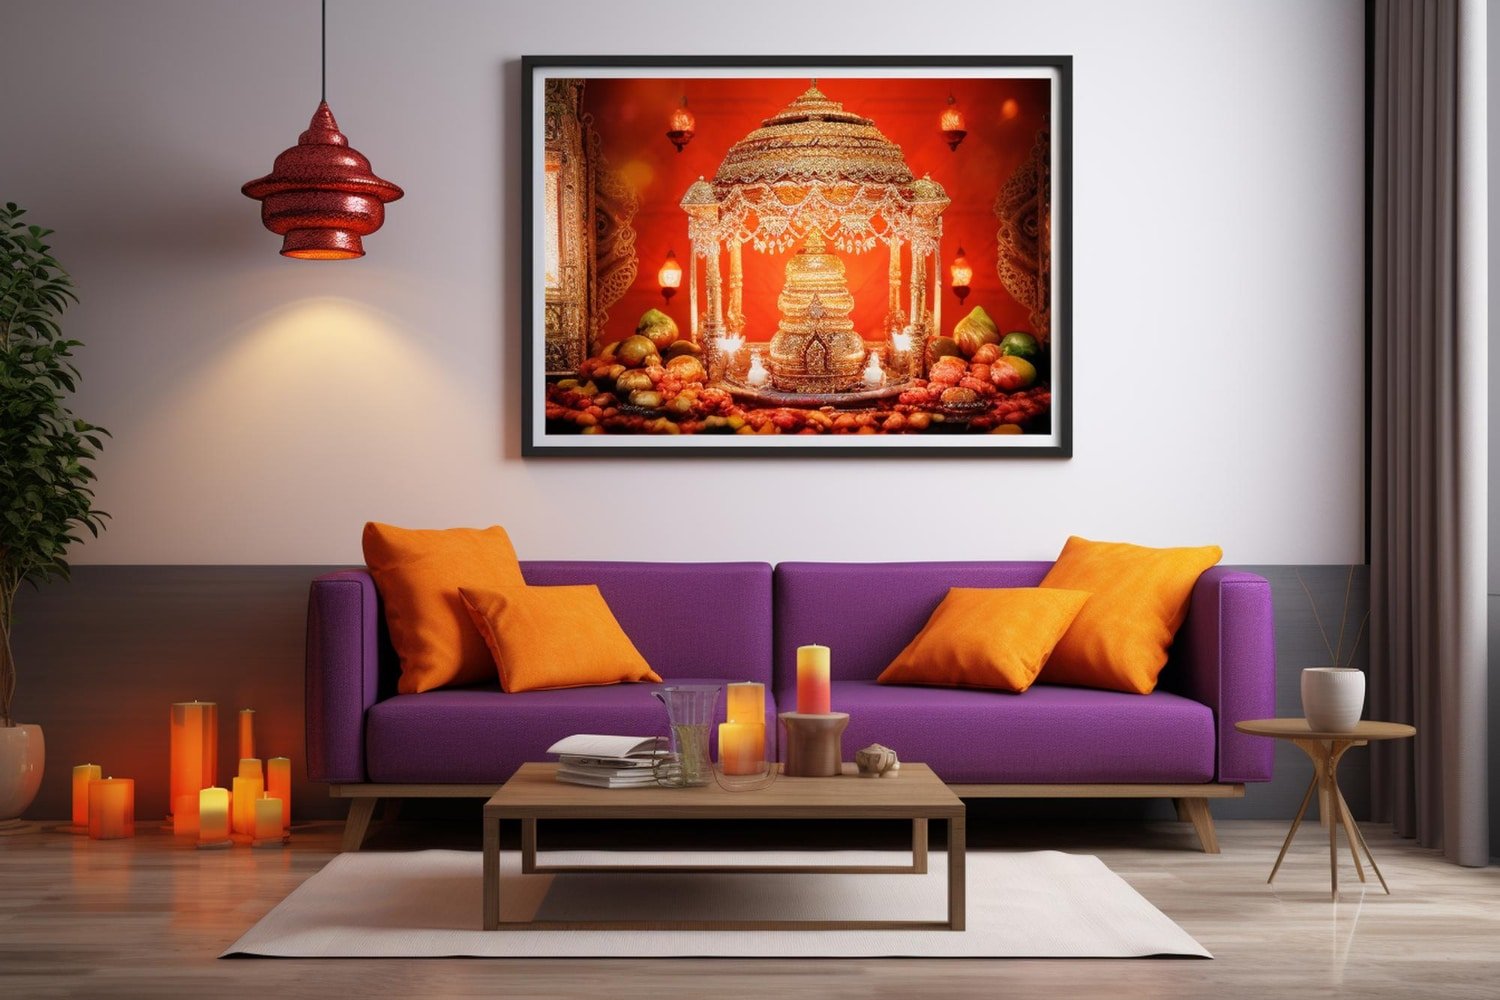 Decorate Your Home With Oilo Studio’s Modern Home Decor